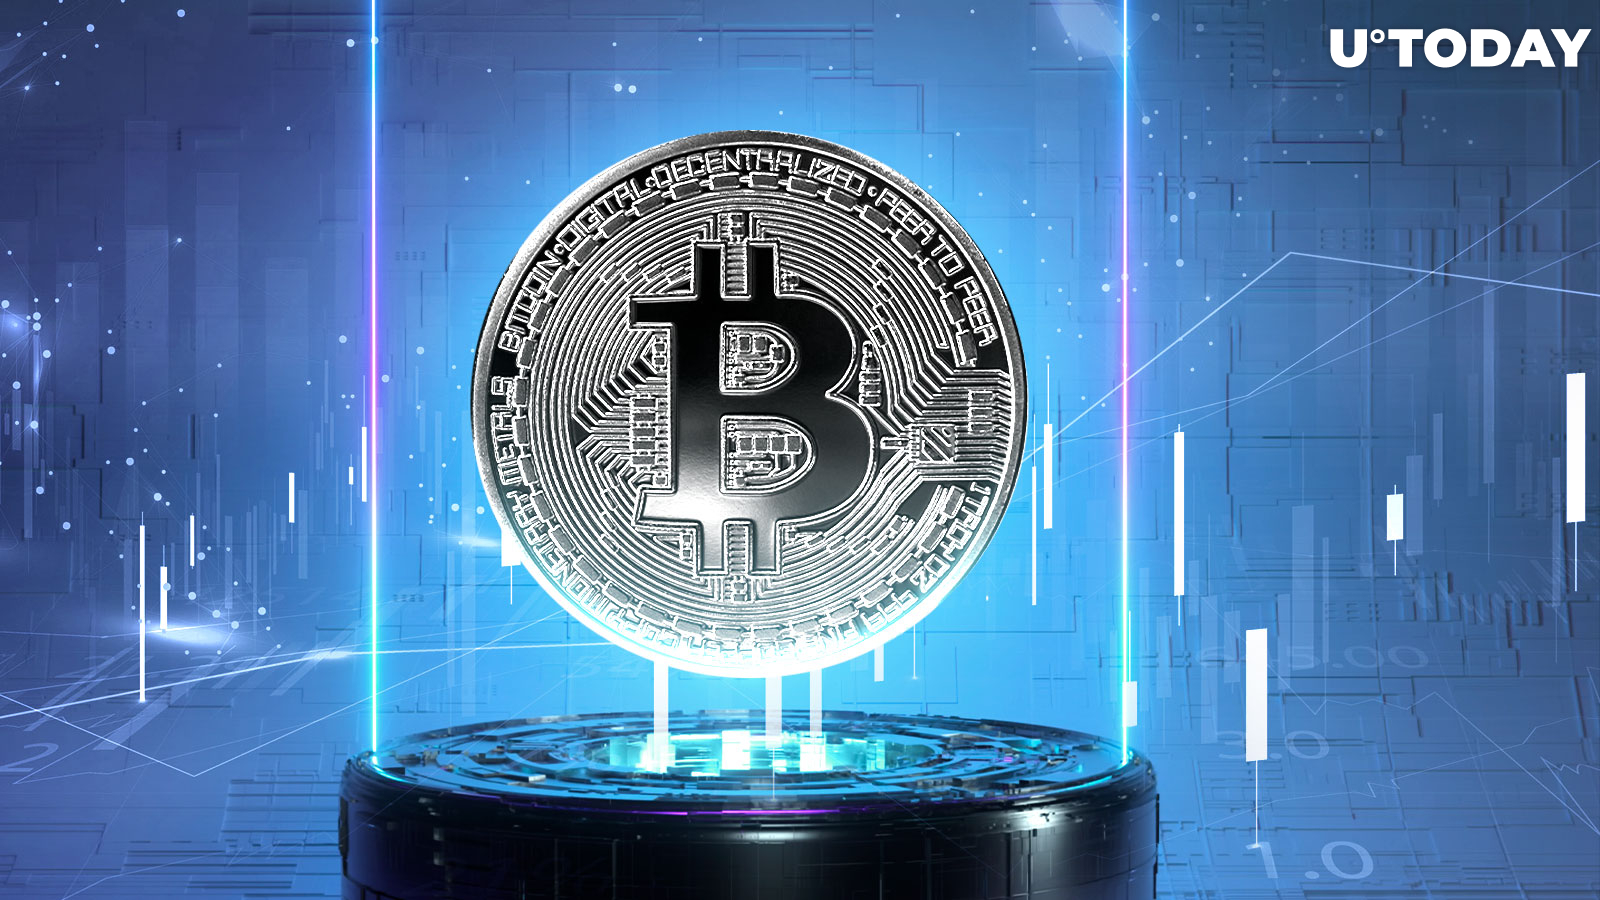 Bitcoin (BTC) to Hit $100K in 21 Days, Predicts Top Analyst